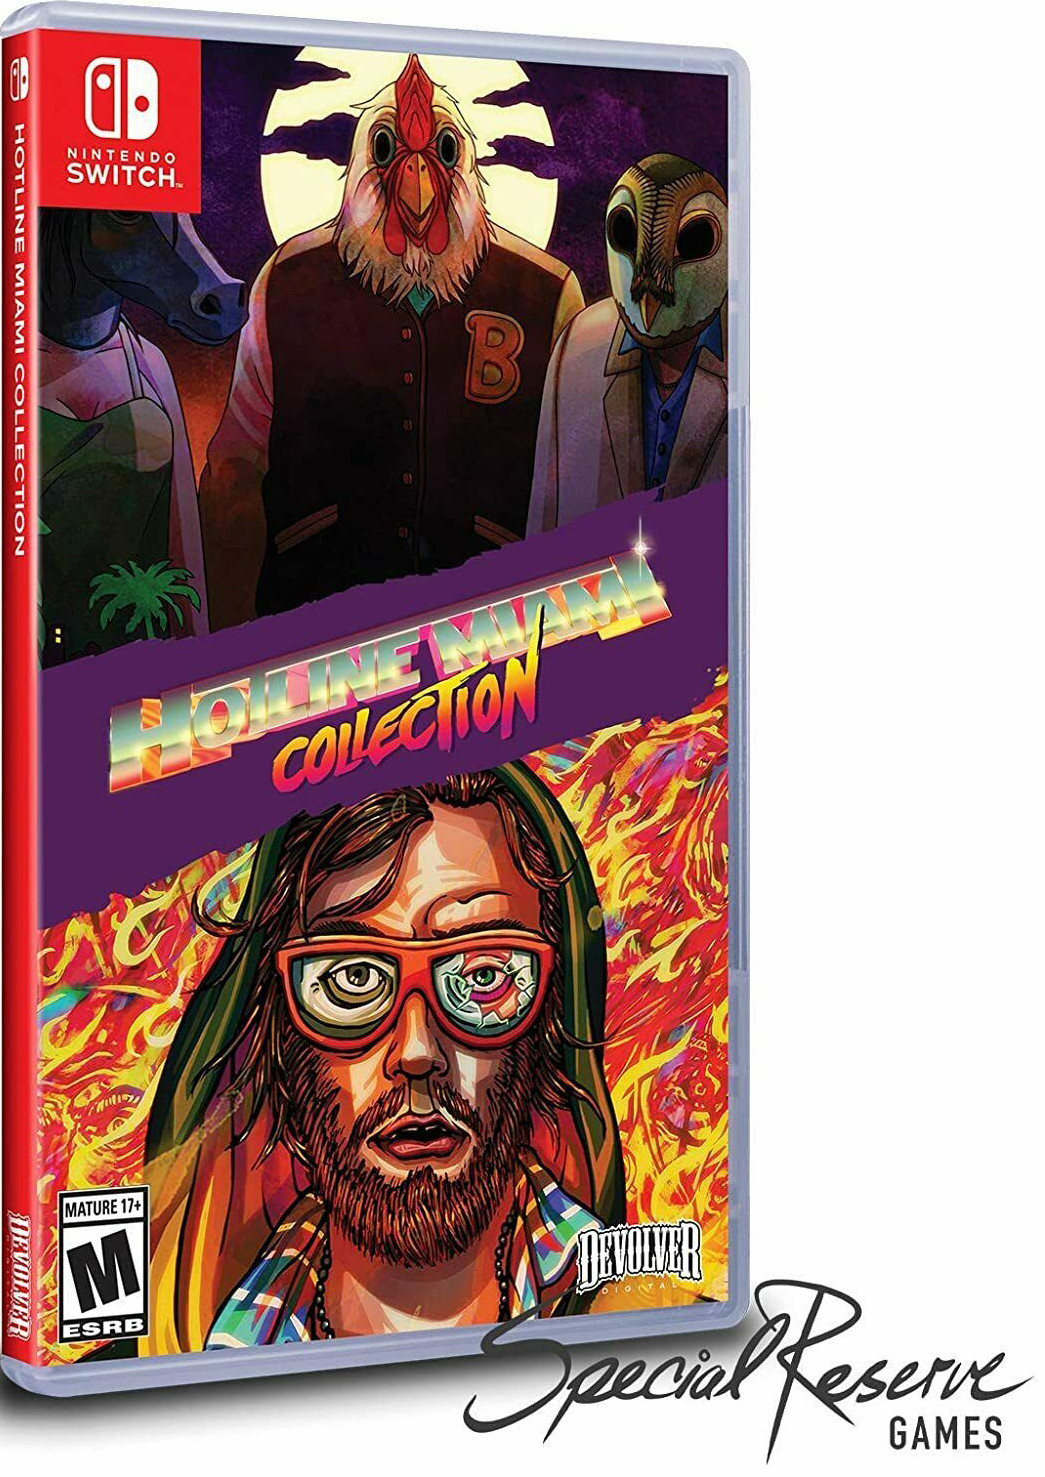 Hotline Miami Collection (Special Reserve Games) - Nintendo Switch